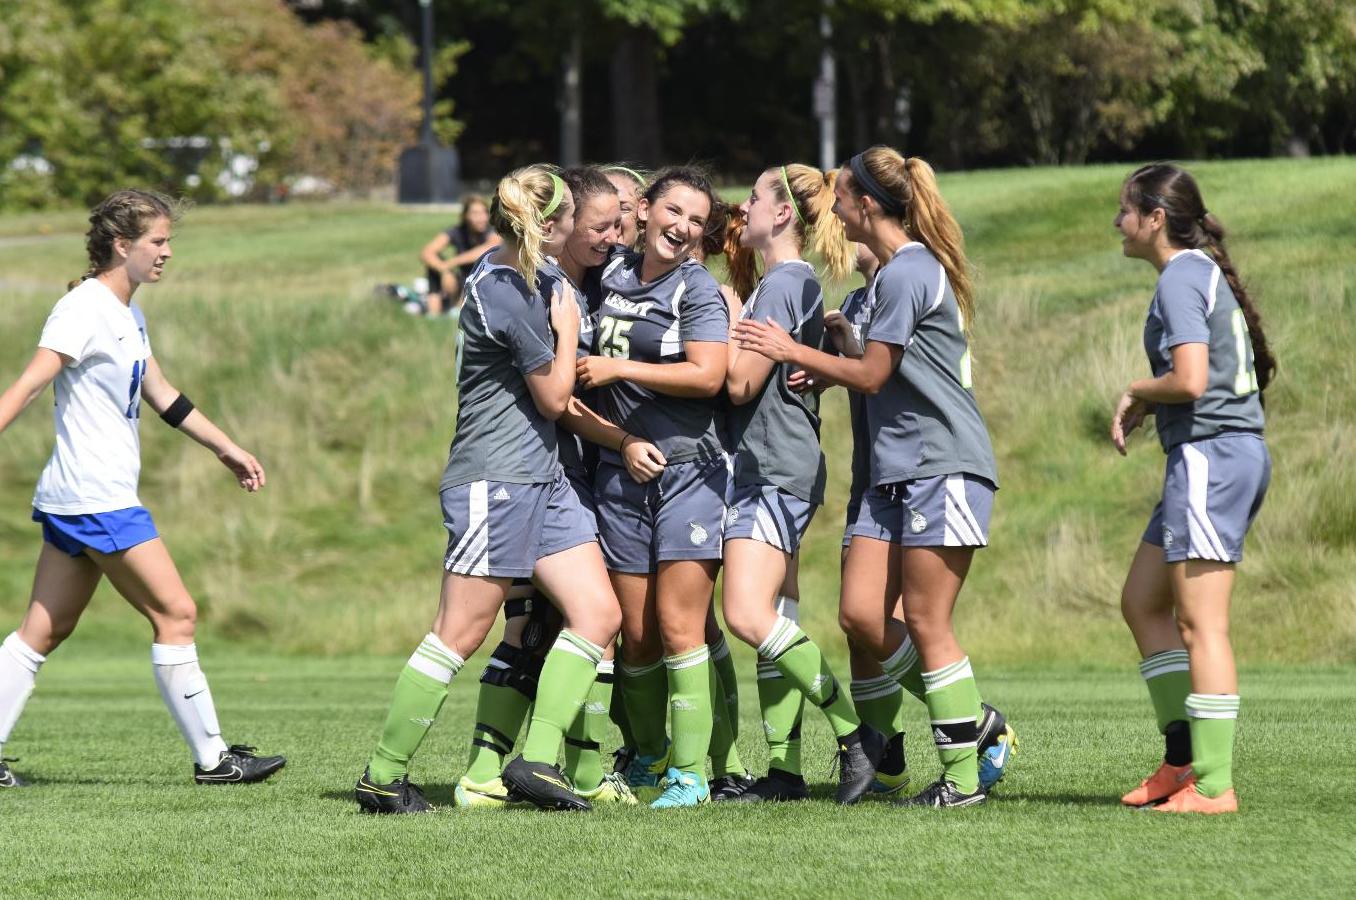 Rubin Continues to Lead Women's Soccer